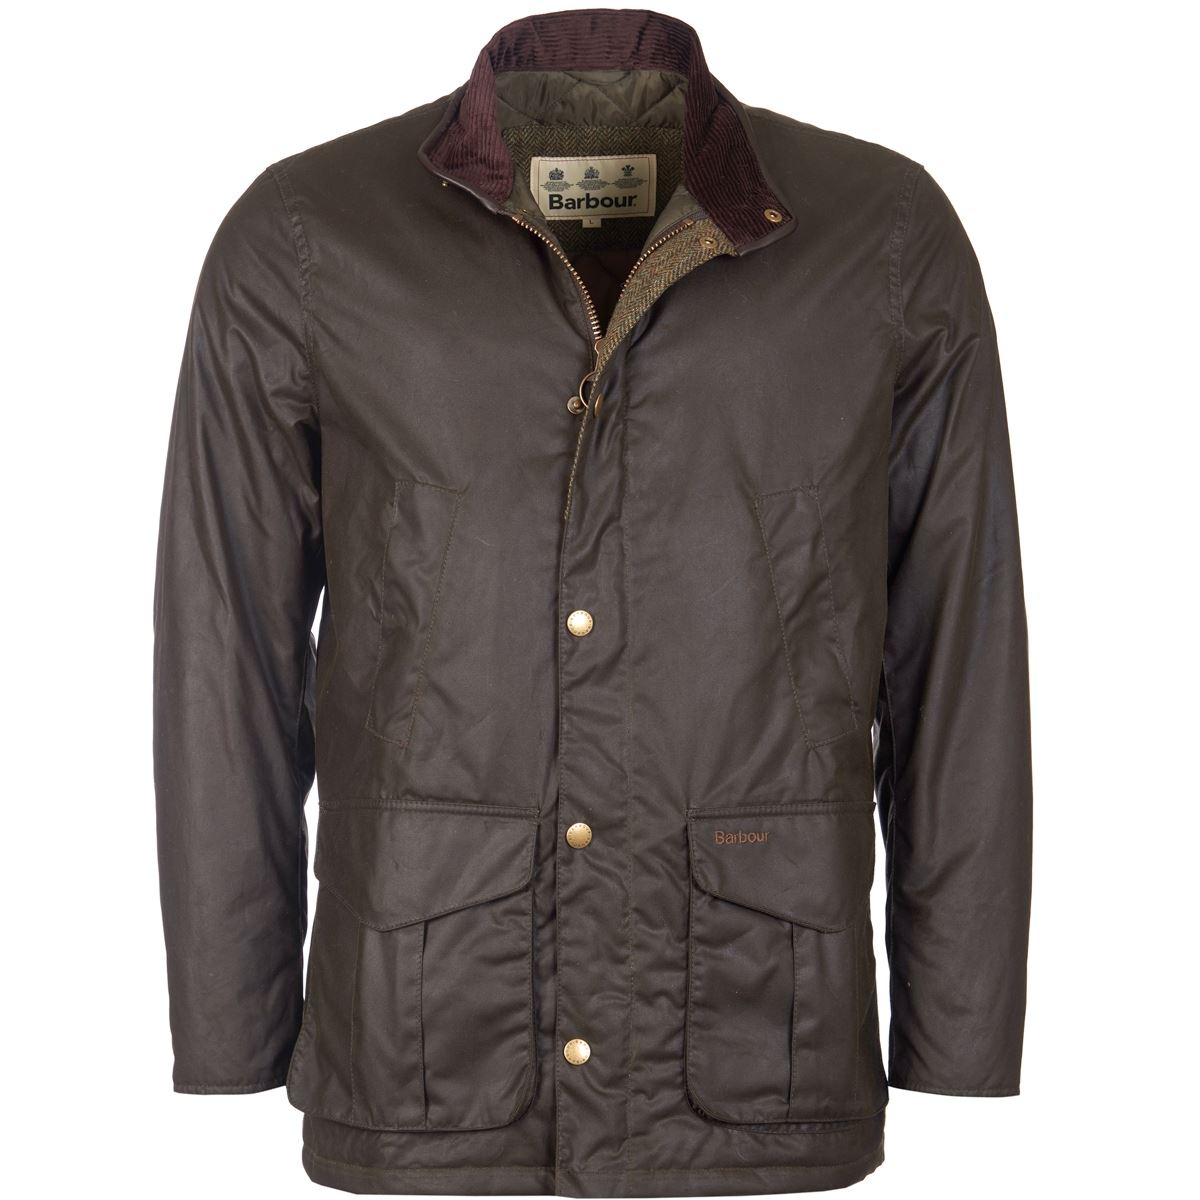 Is the Barbour Hereford jacket both practical and stylish?